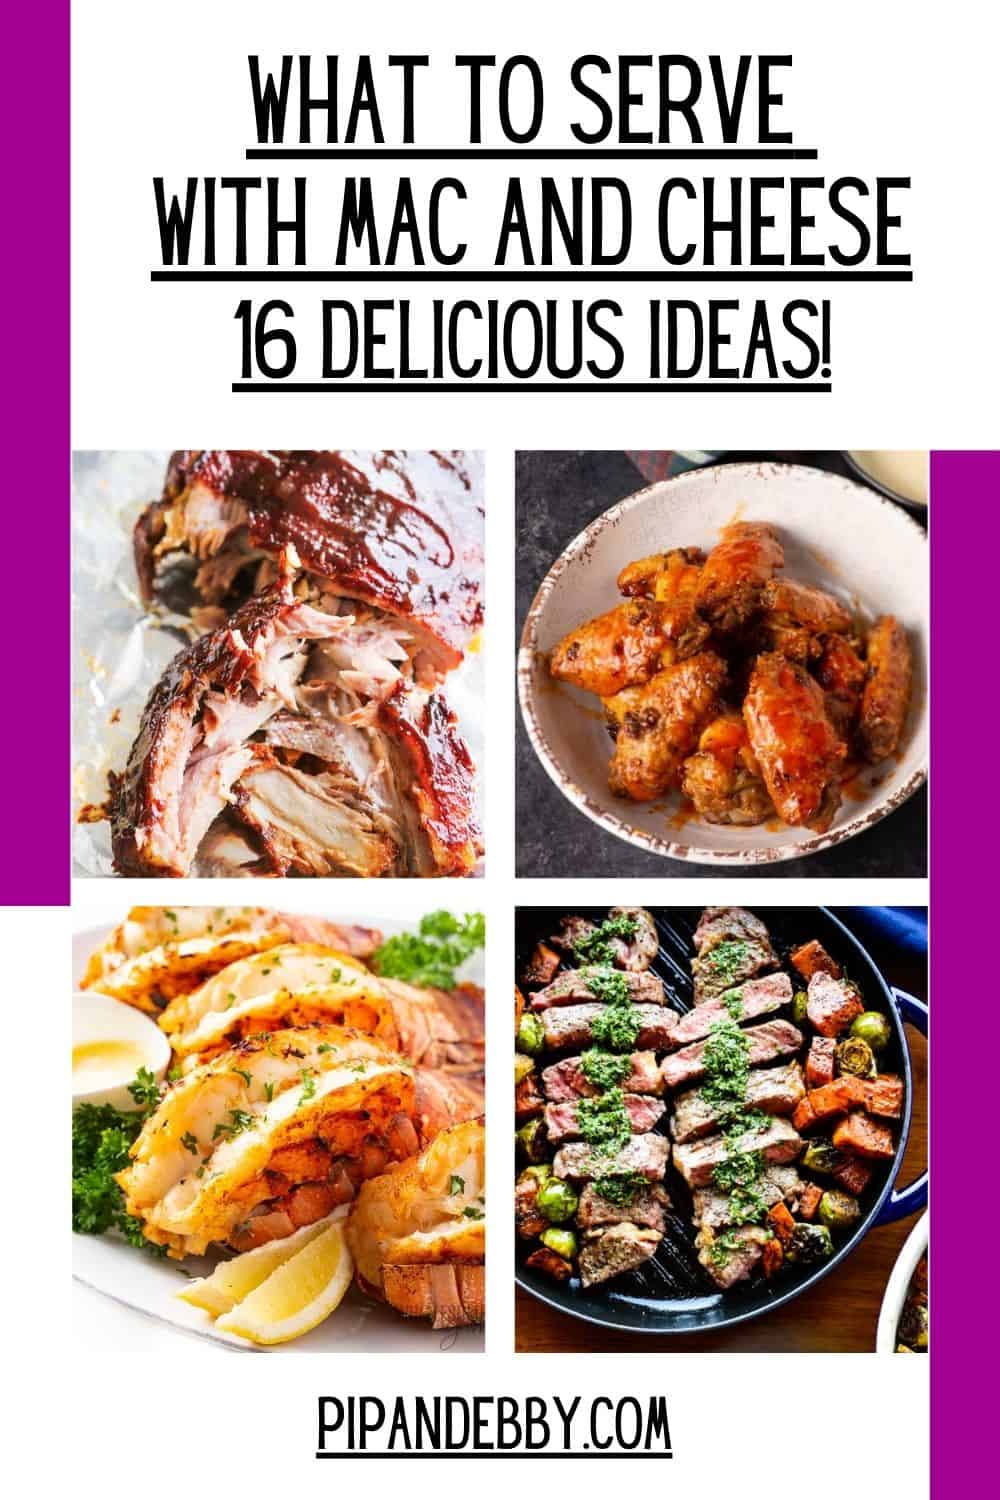 Four photos of meaty dishes with copy reading, "What to serve with mac and cheese - 16 delicious ideas!"